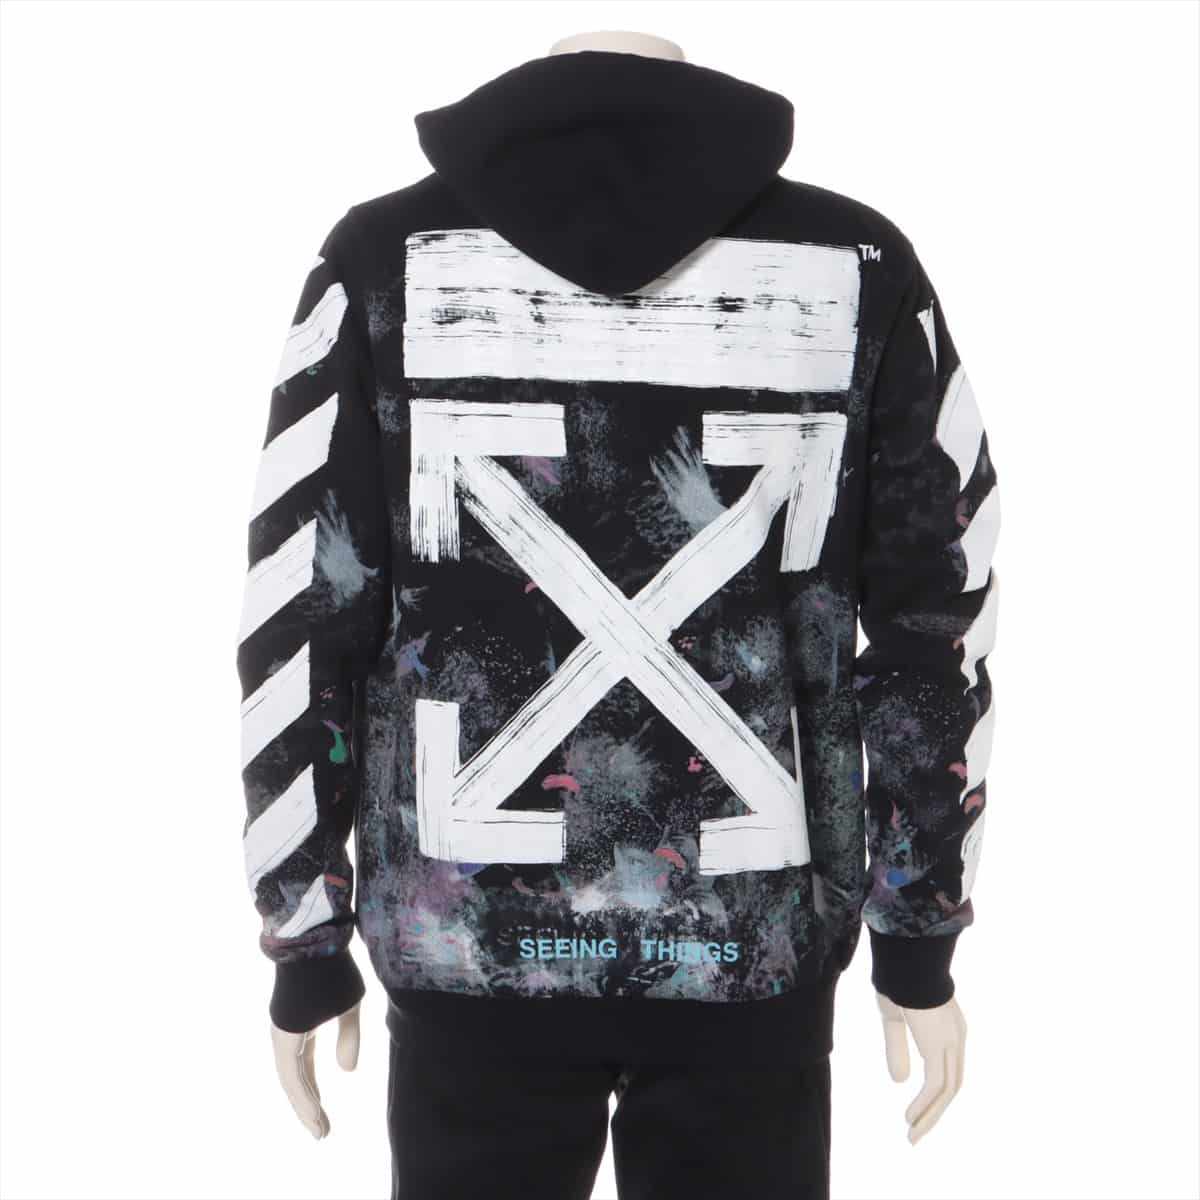 Off-White 17AW Cotton Parker XS Men's Black   Diag Galaxy Brushed Zip Hoodie OMBB003F17619030